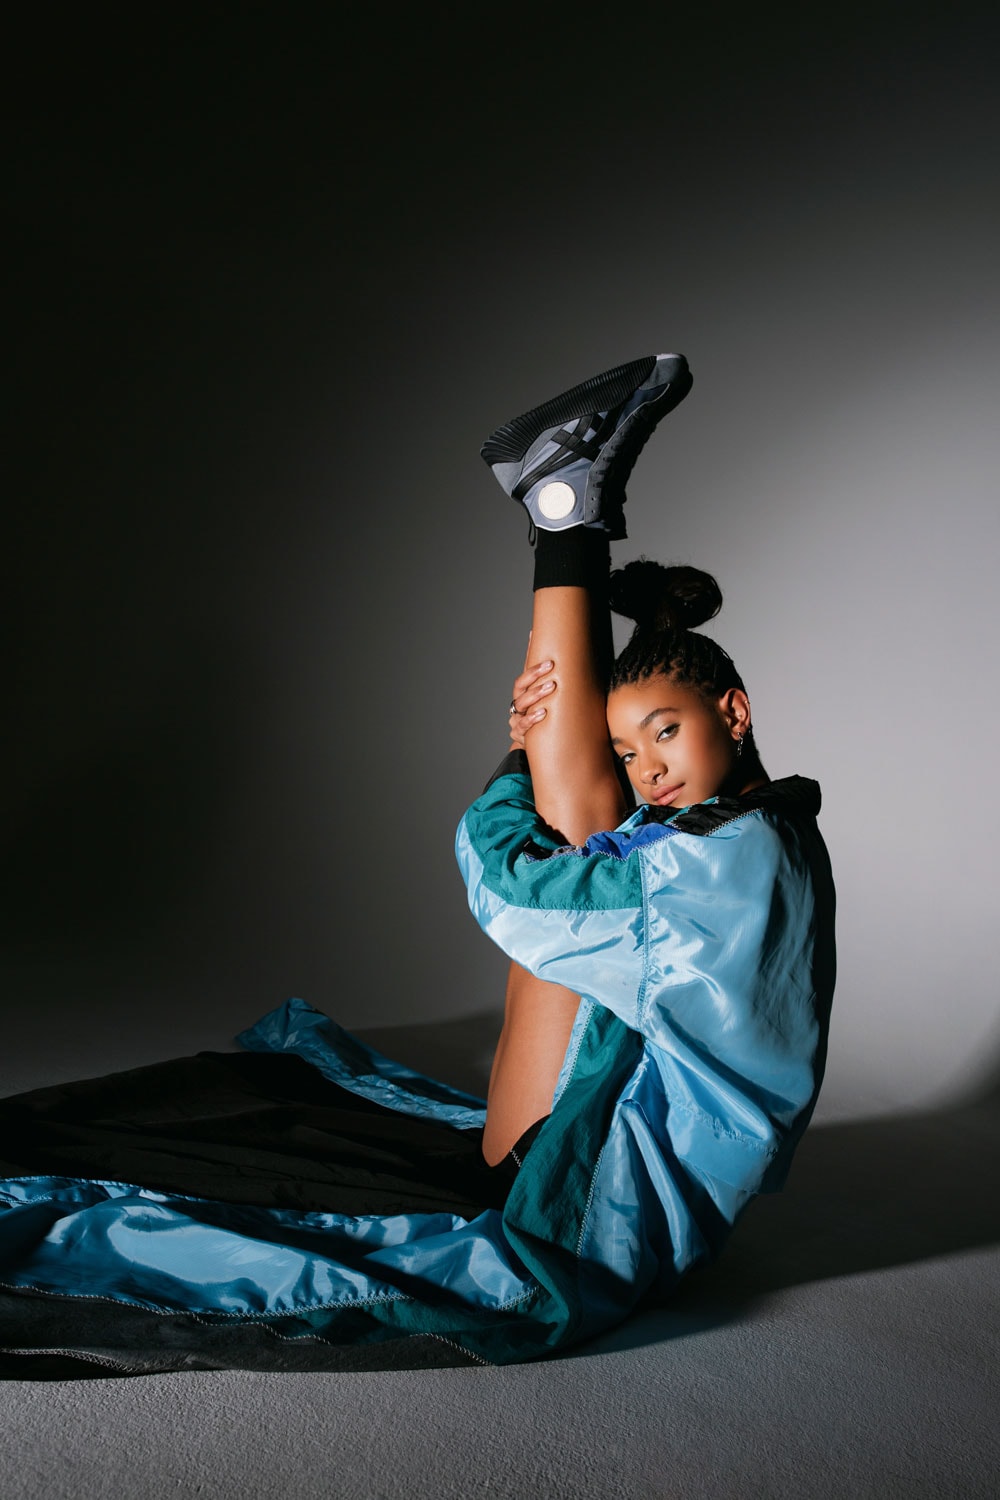 onitsuka tiger spring summer 2021 campaign willow smith